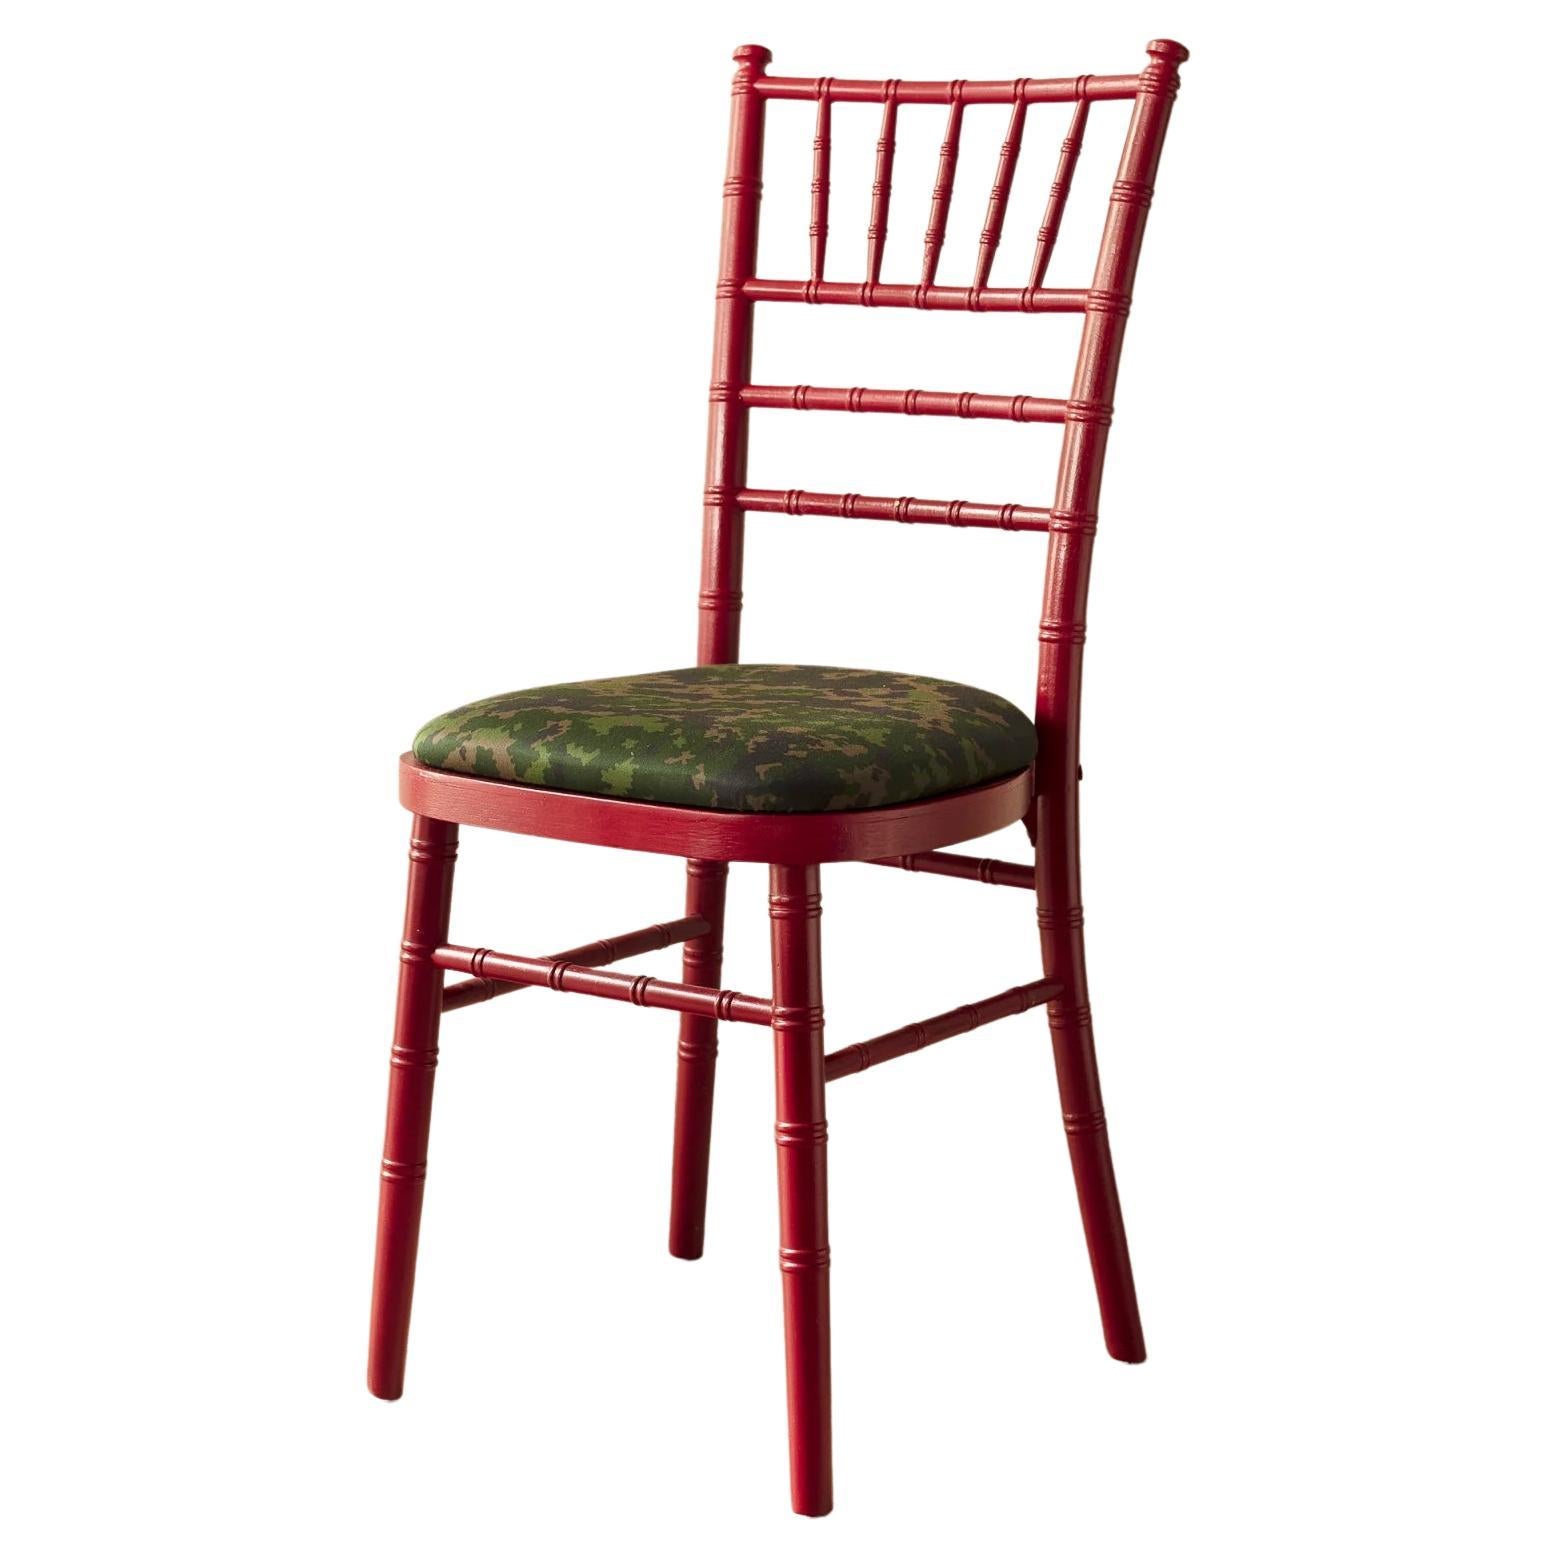 Emergency Side Chairs For Sale